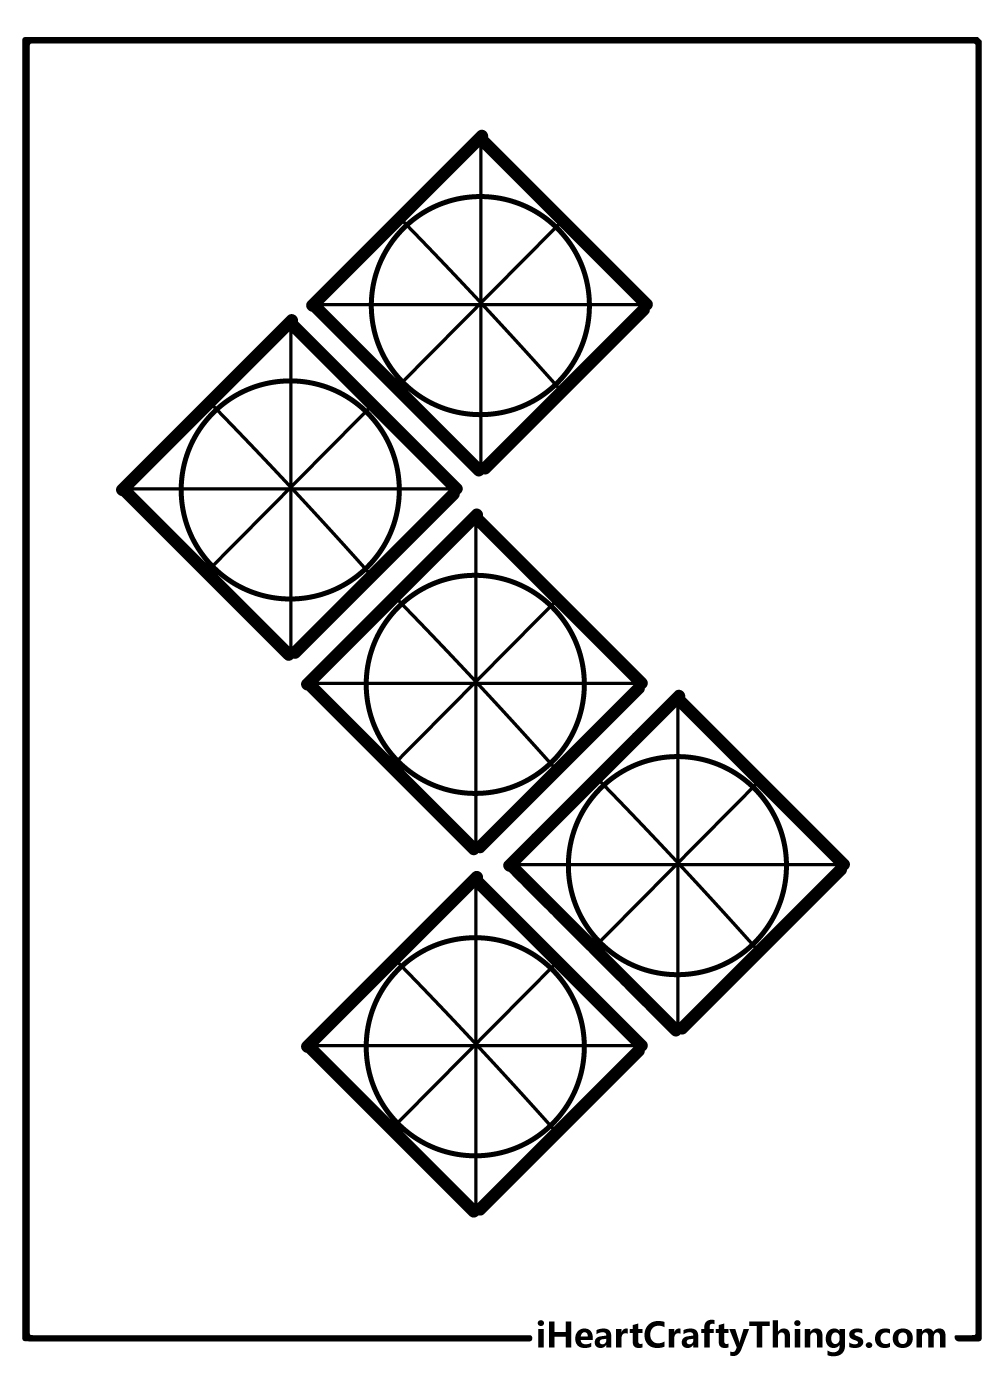 Geometric Coloring Sheet for children free download